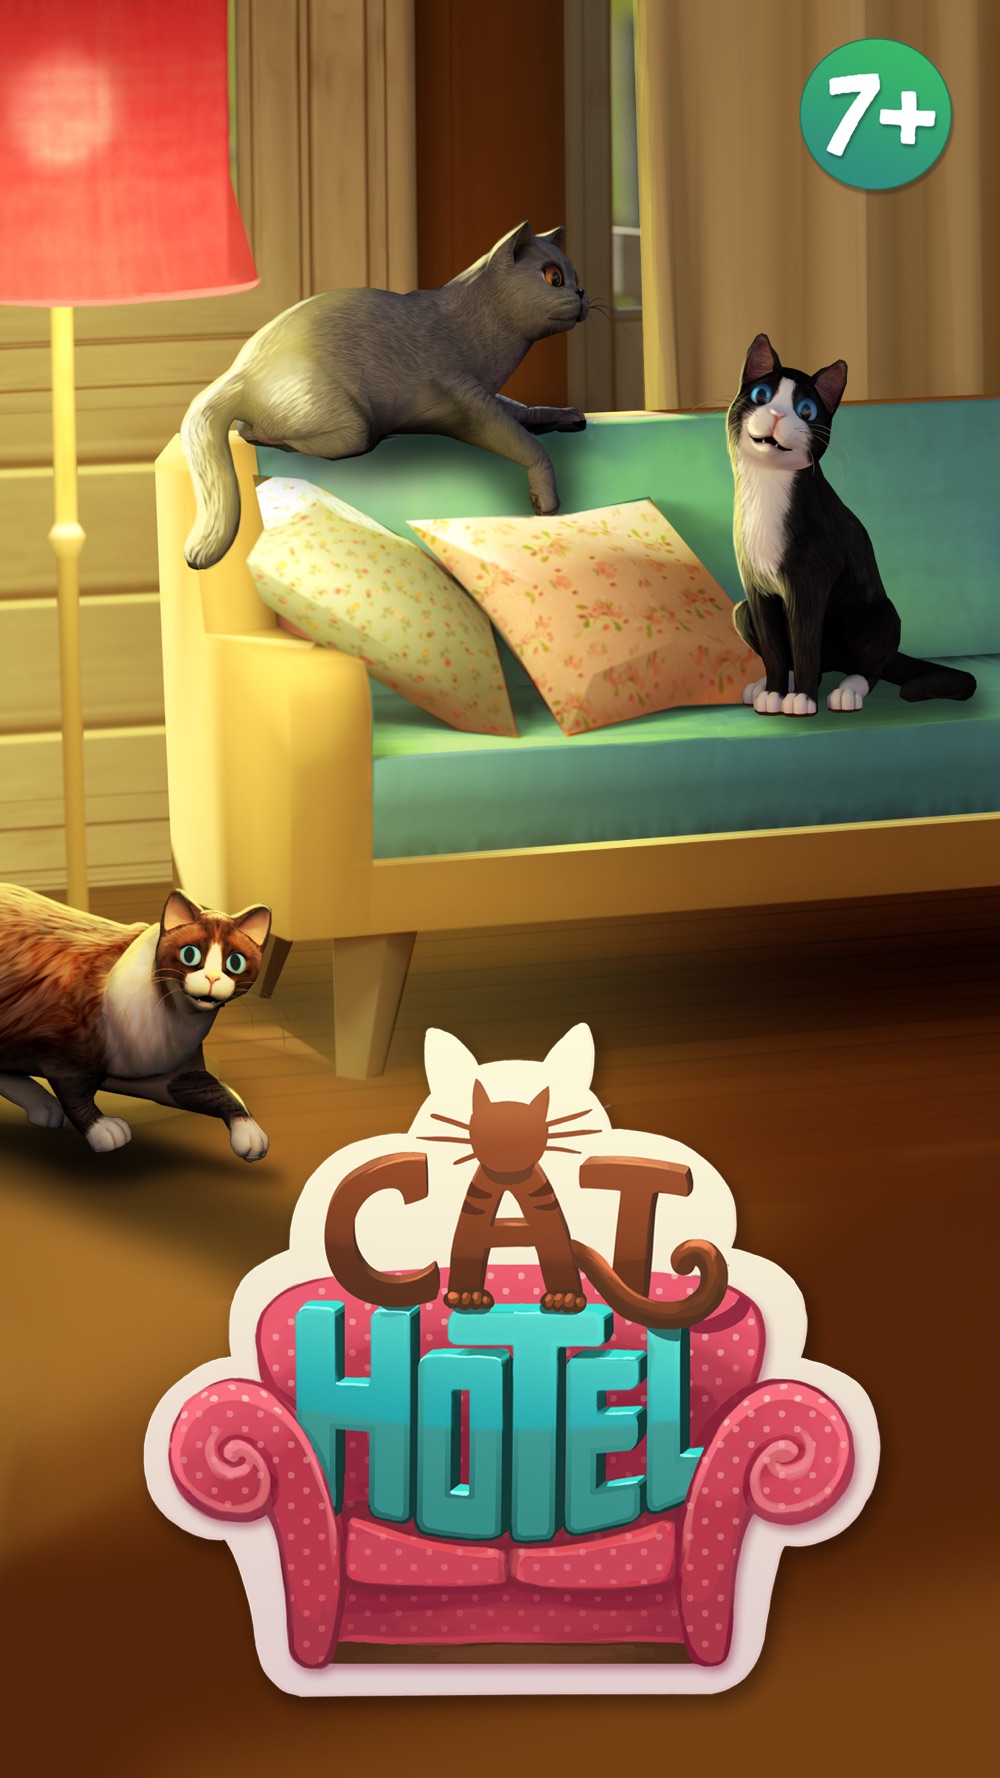 CatHotel – Care for cute cats